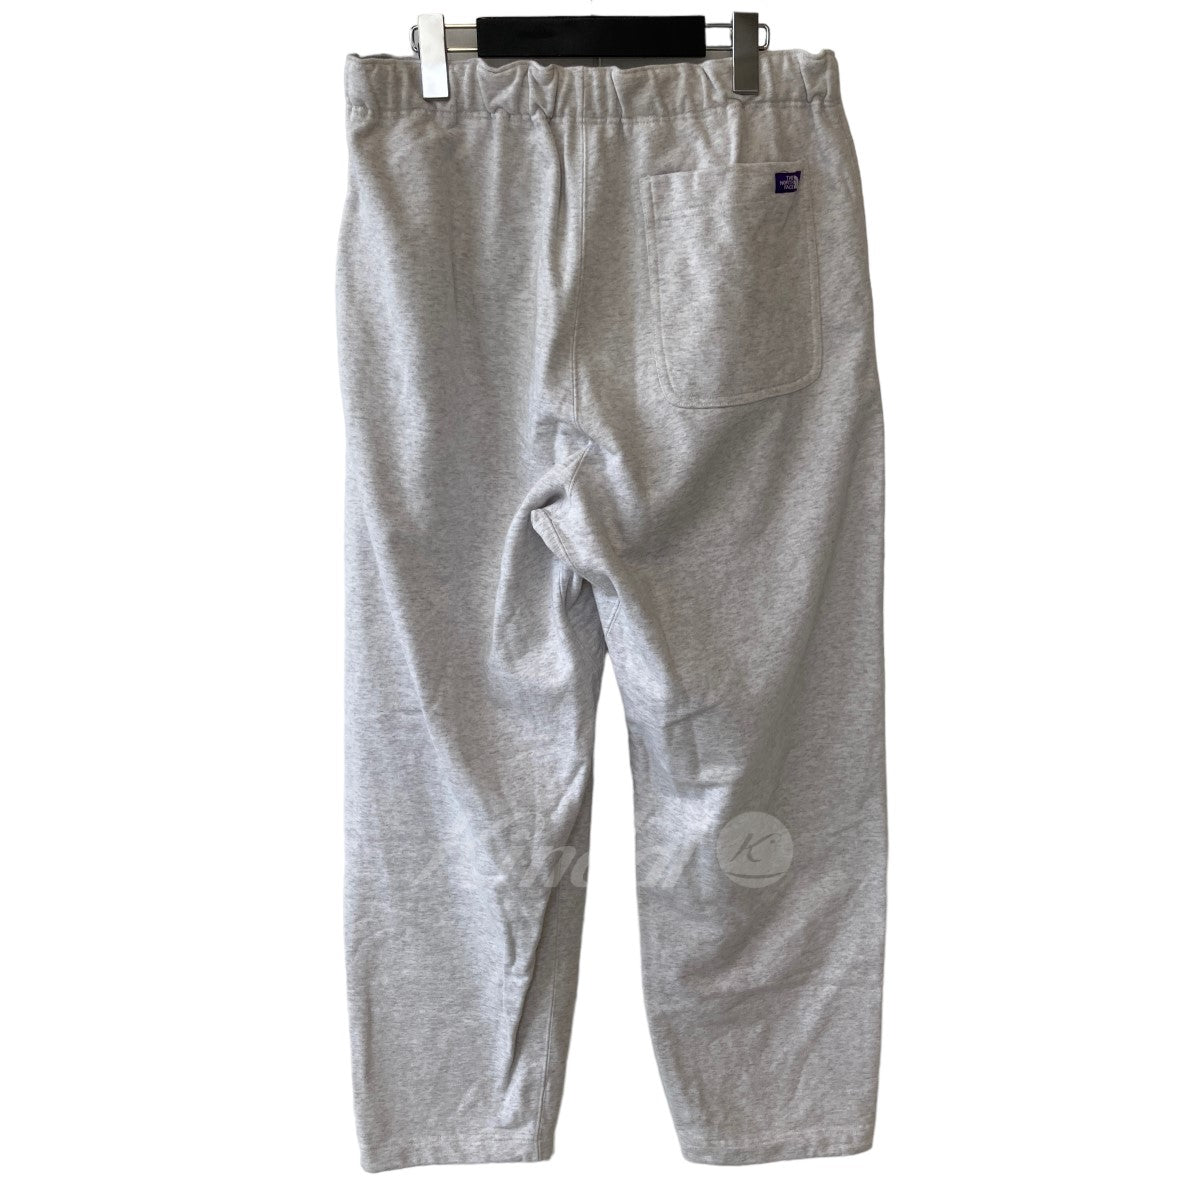 High Bulky French Terry Sweat Pants - NT5208N